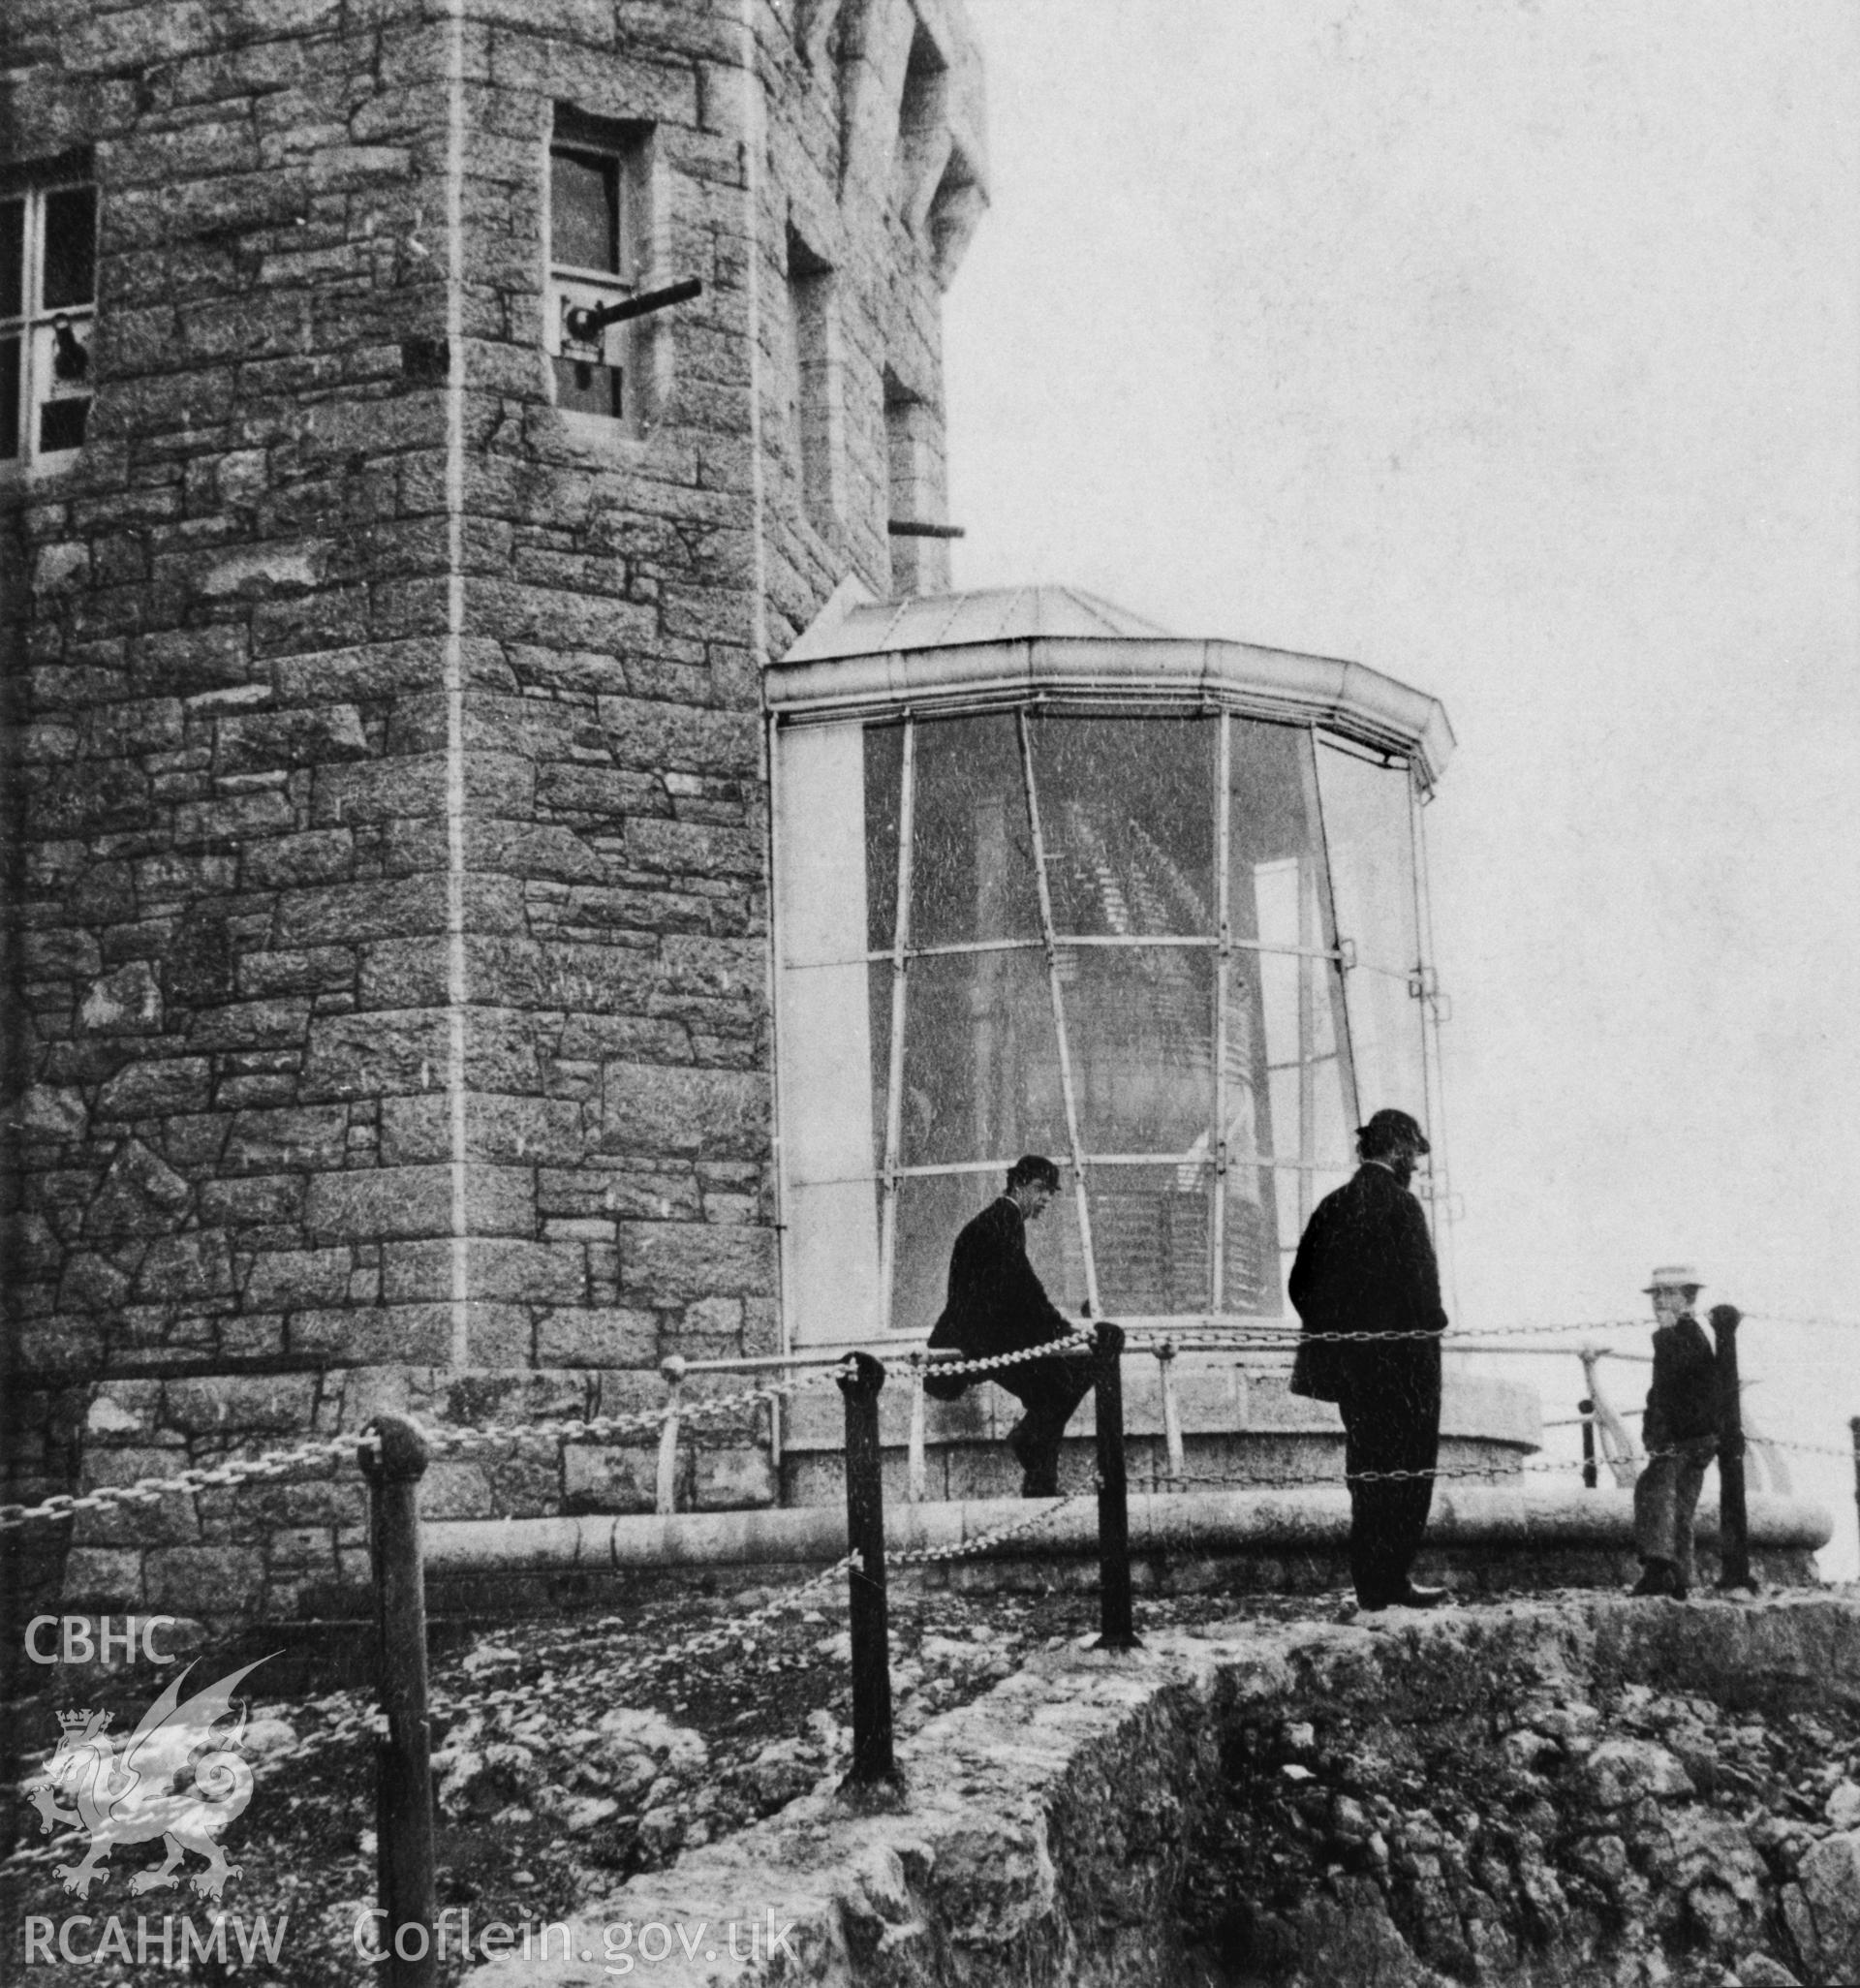 Exterior view of lighthouse with two men and a boy in the foreground